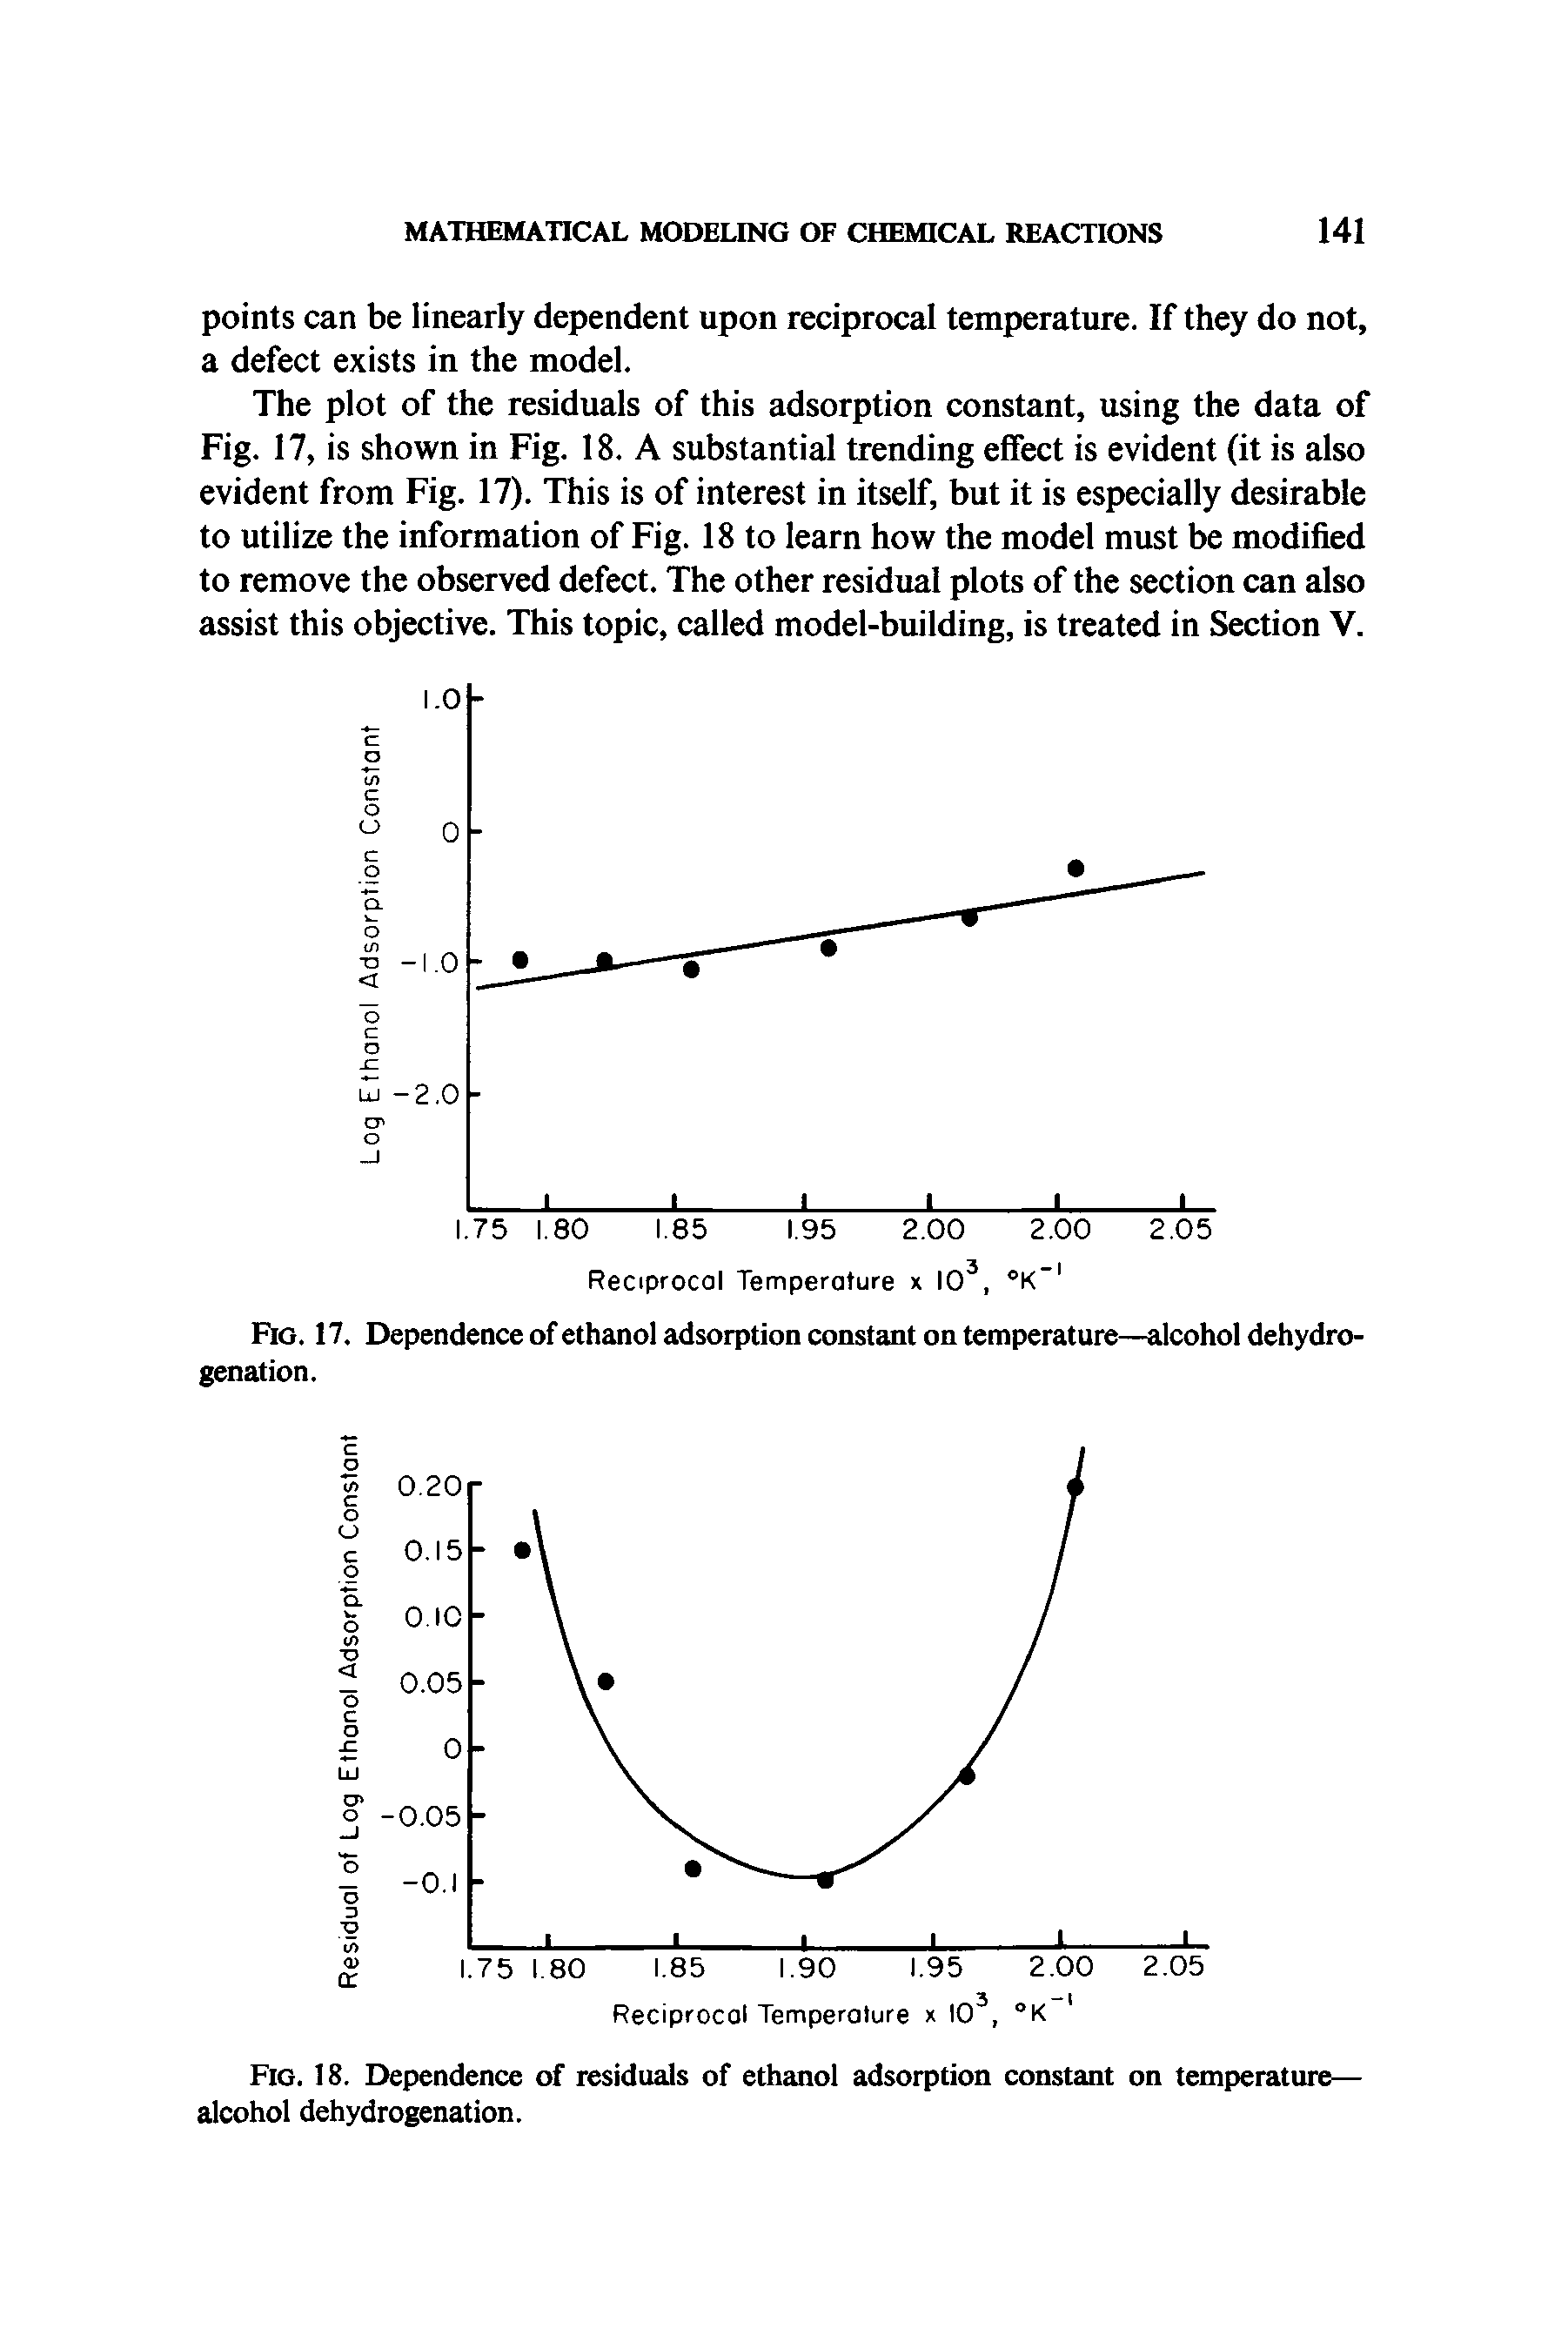 Fig. 18. Dependence of residuals of ethanol adsorption constant on temperature— alcohol dehydrogenation.